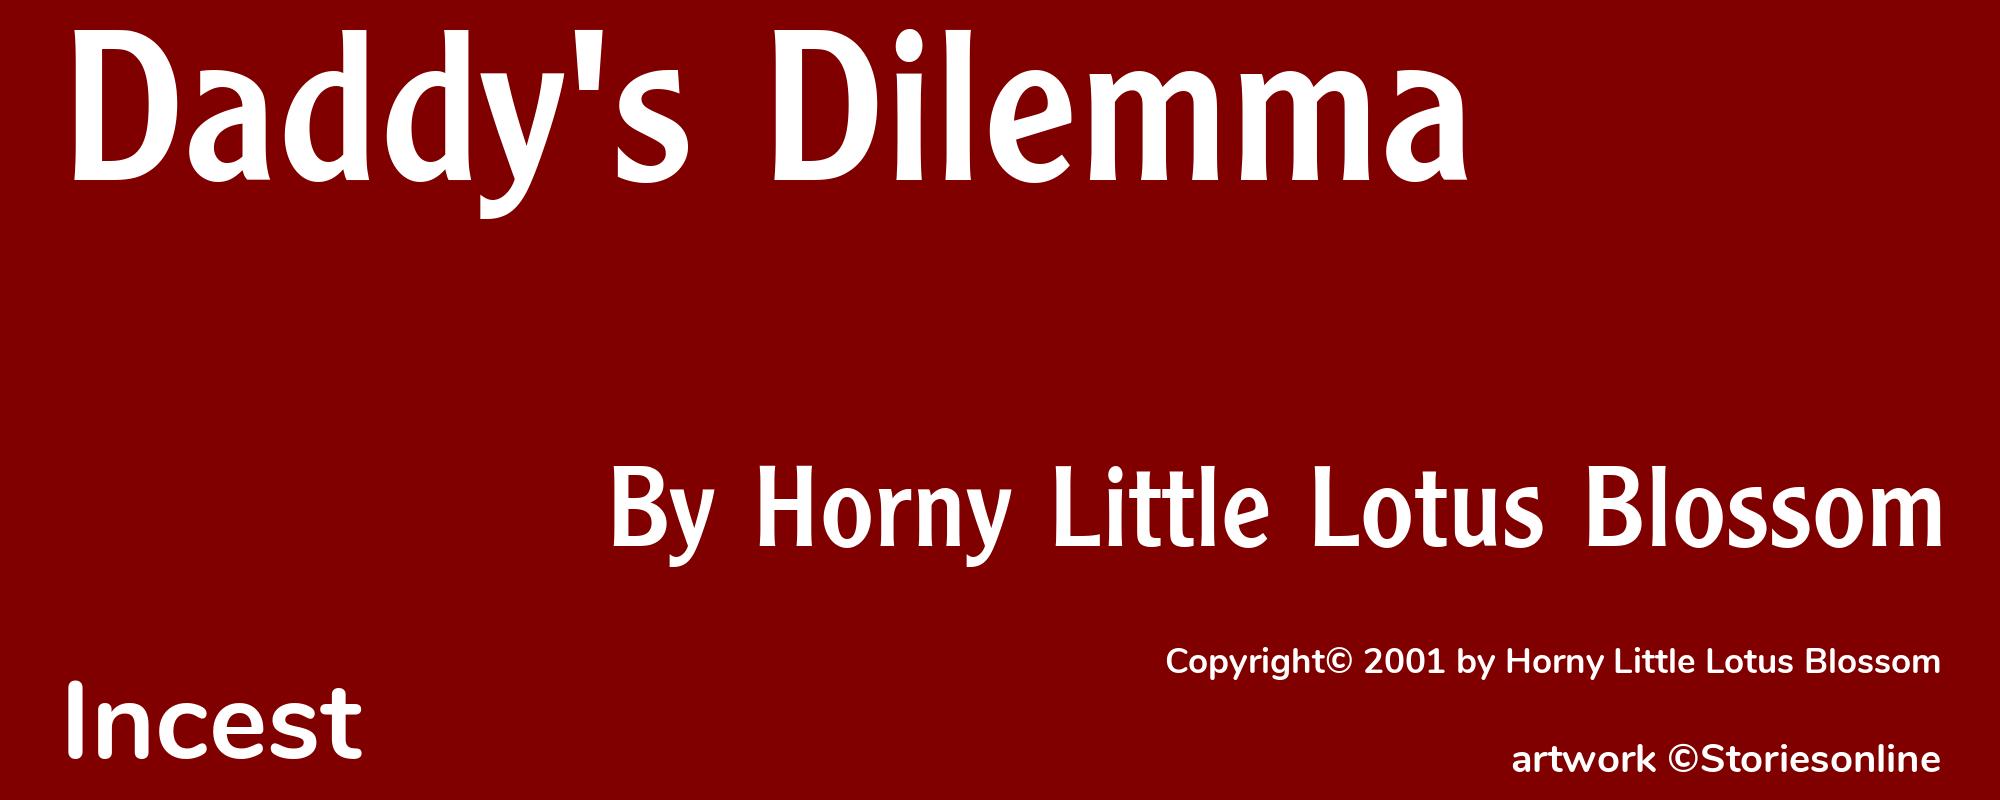 Daddy's Dilemma - Cover